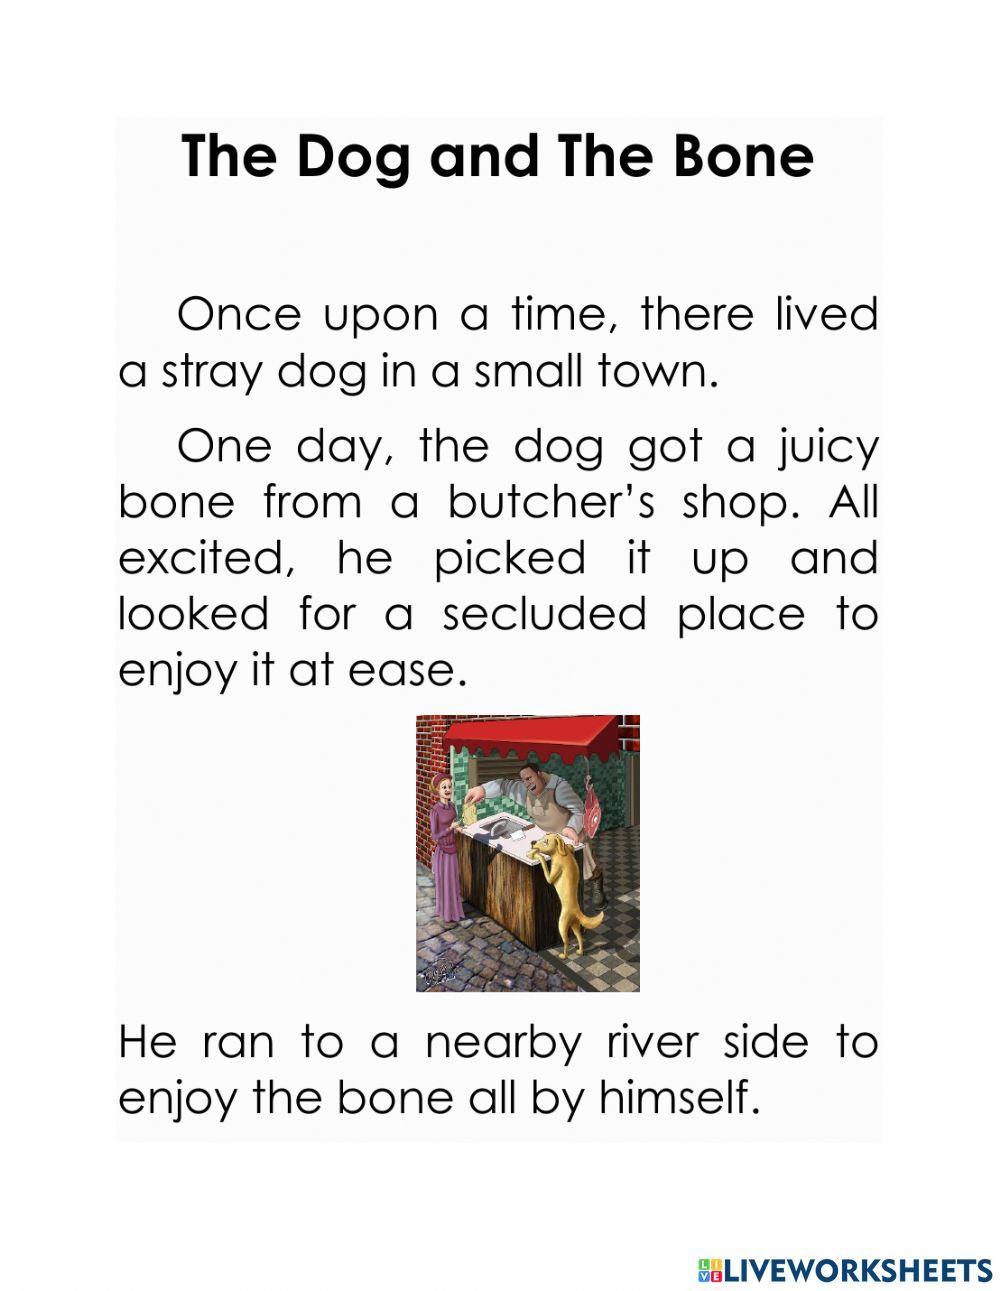 The dog and the bone